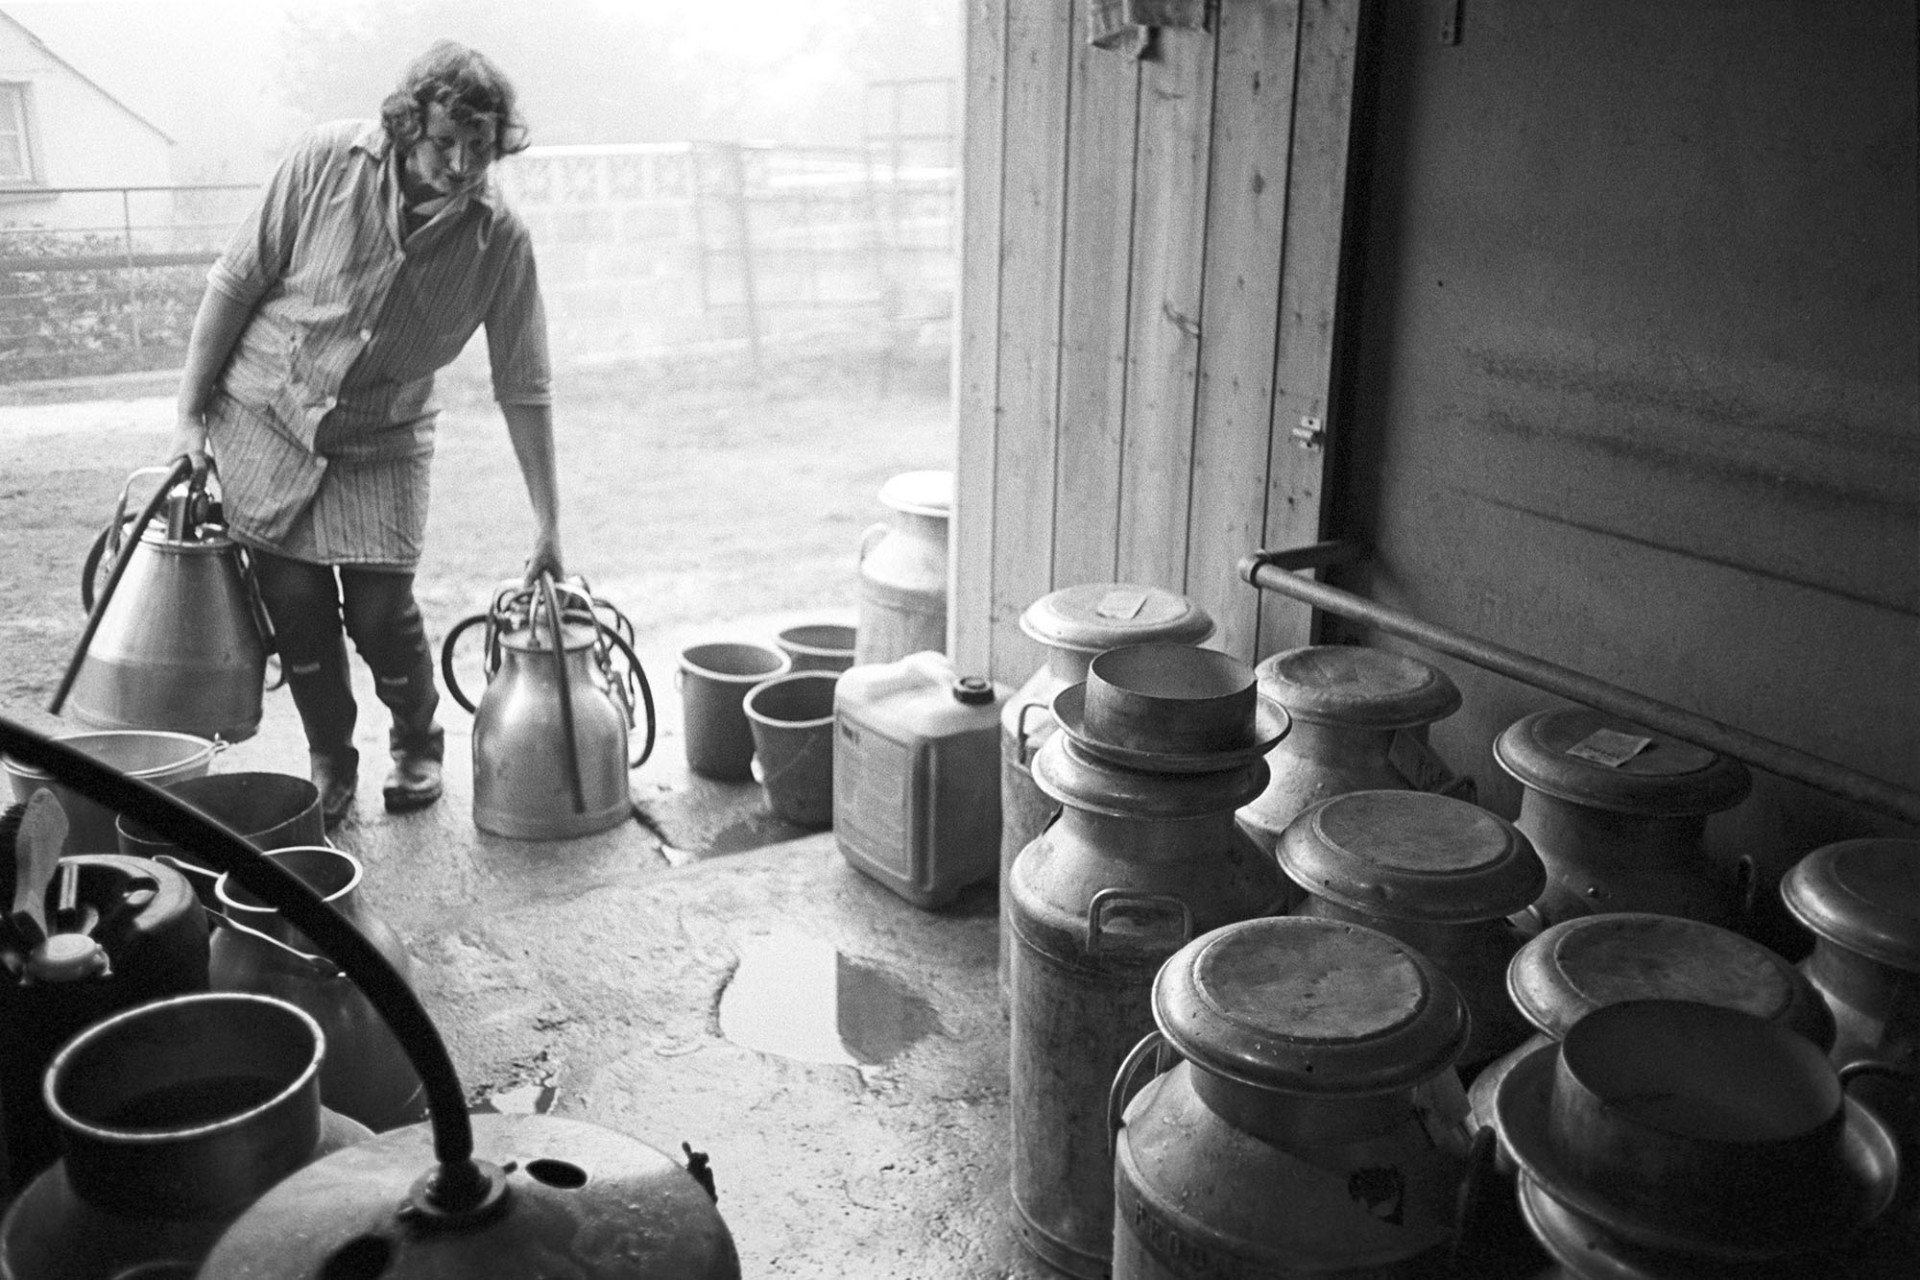 Farmers wife doing morning milking, churns and parlour with milking machine (bucket). 
[Valerie Medland doing the morning milking at Hall Court Farm, Petrockstowe. She is carrying milking machines and looking into a barn or dairy parlour with milk churns.]